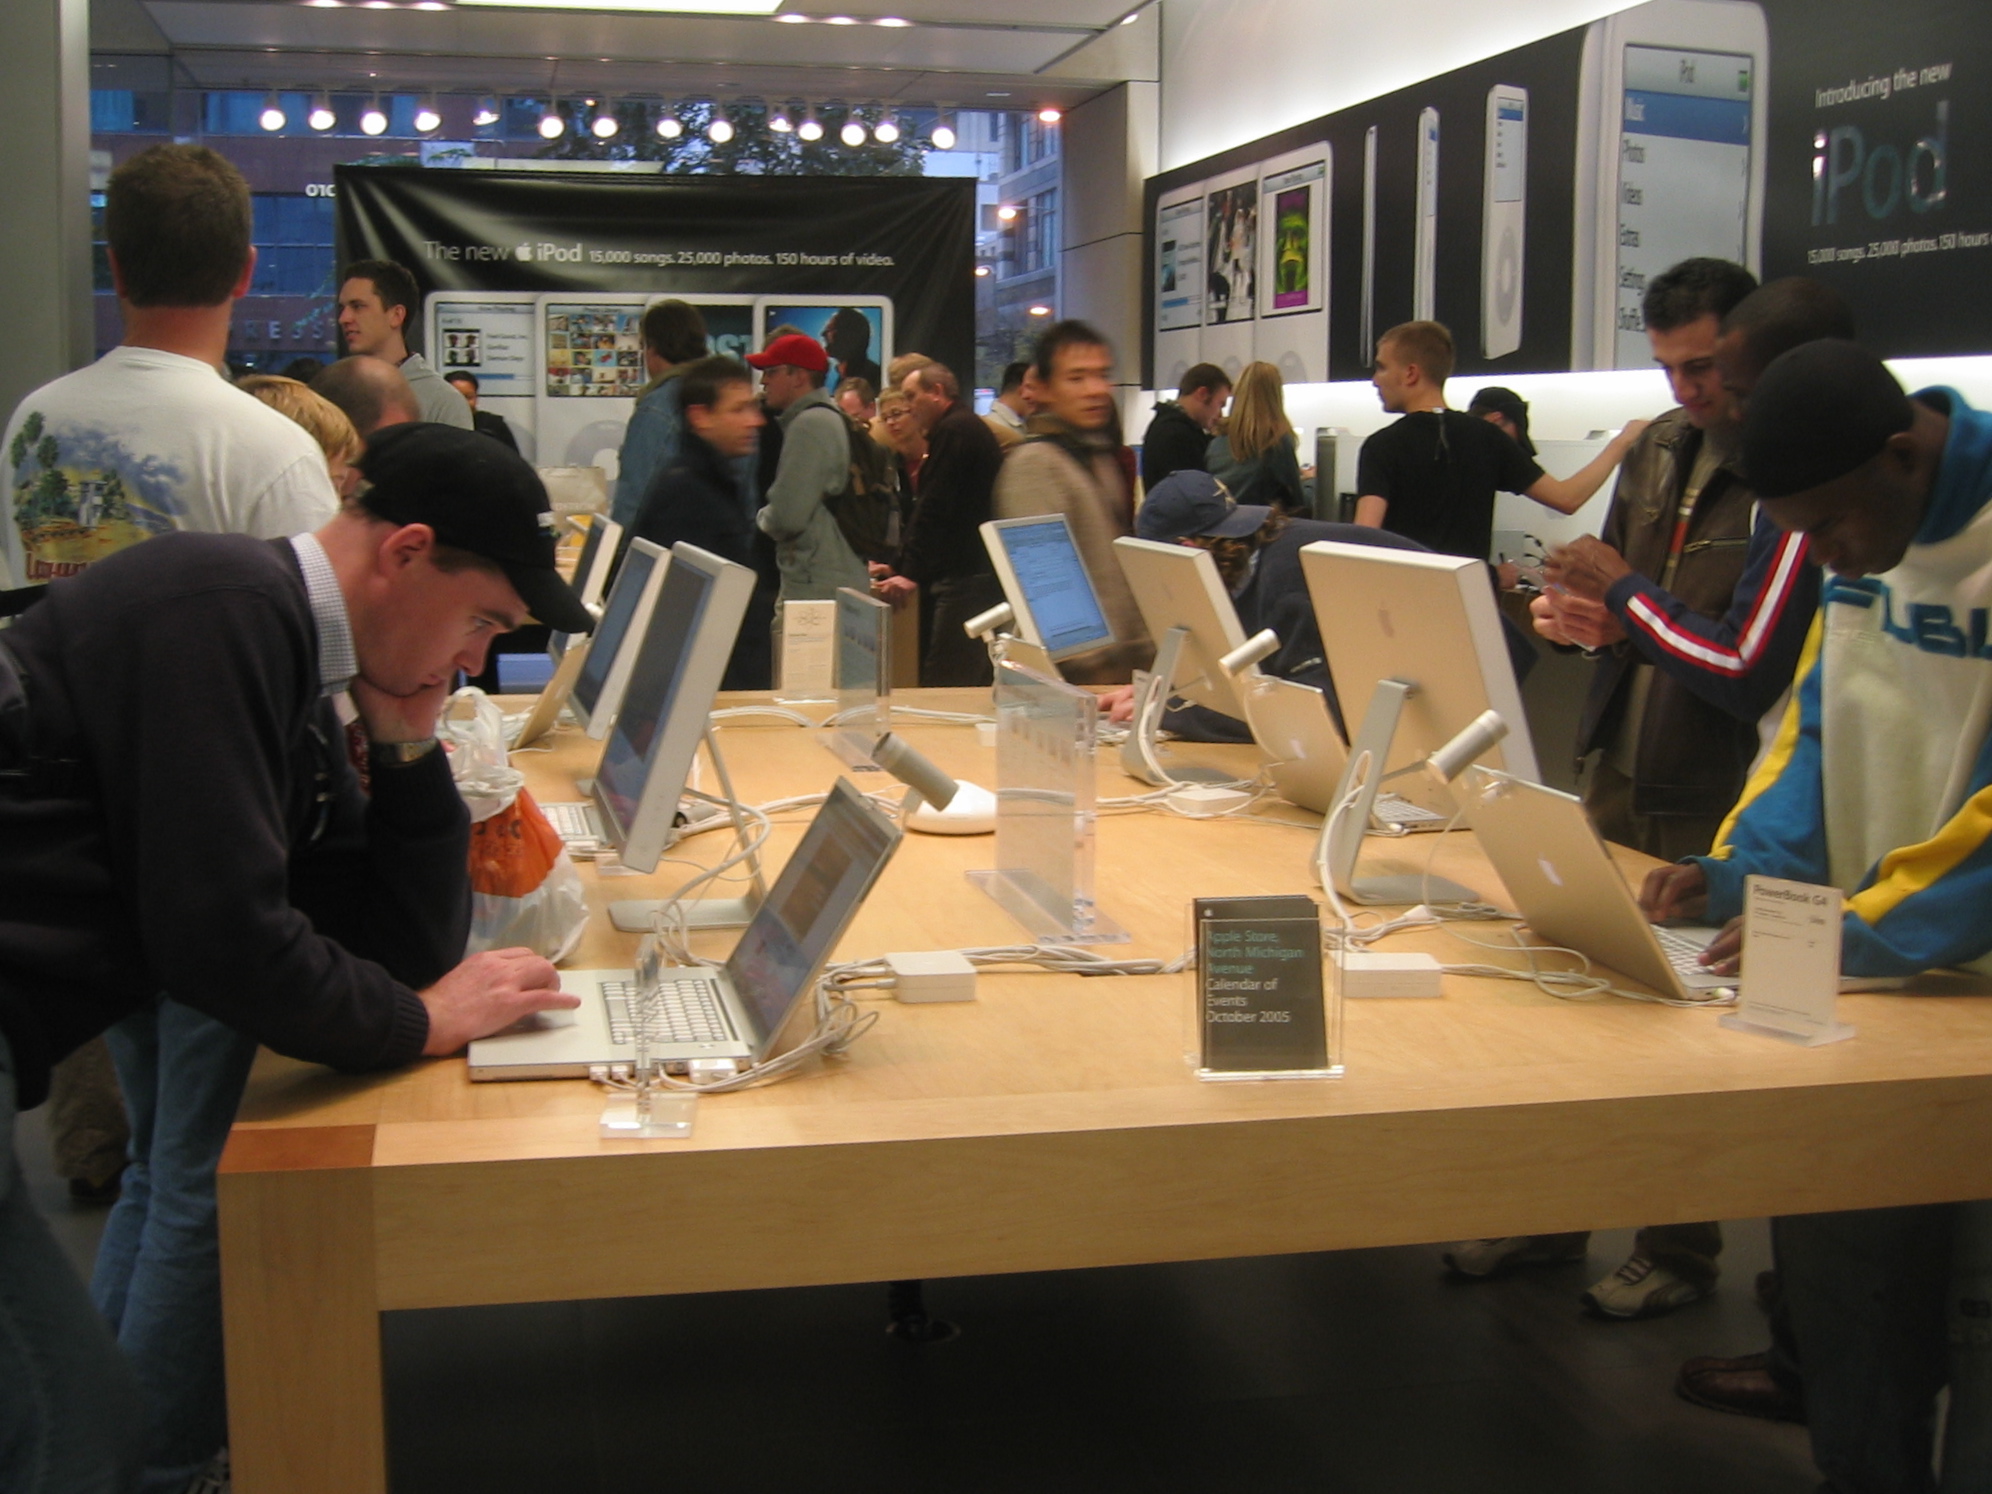 busy apple store shows why seo is a process - cause things are constantly changing